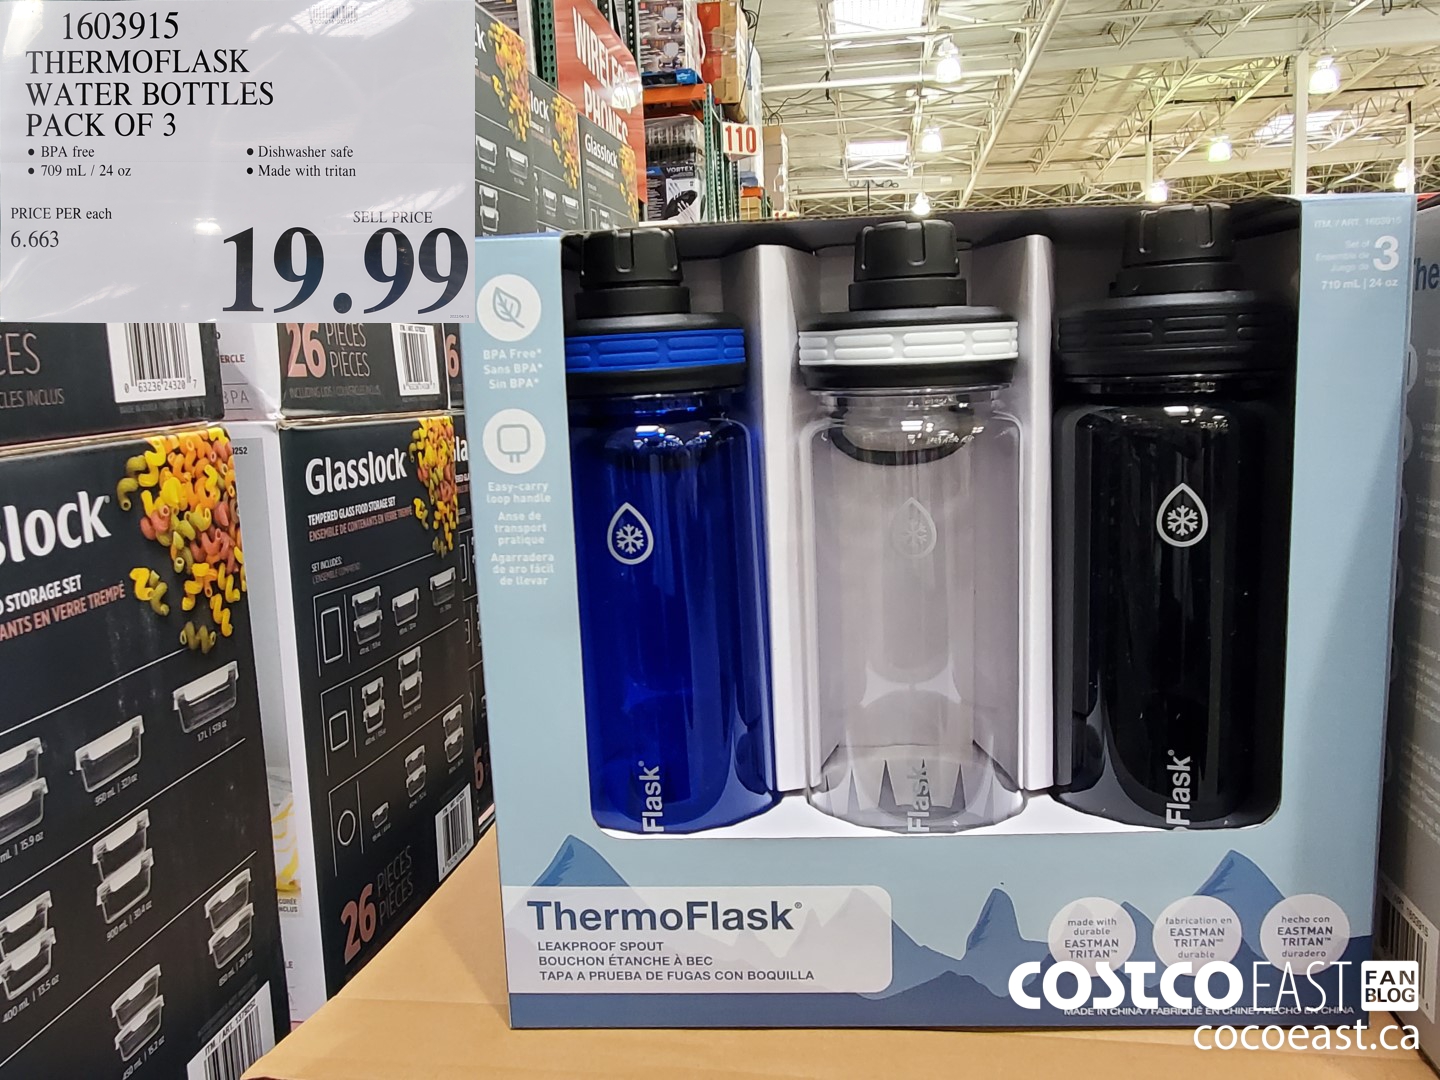 https://east.cocowest1.ca/uploads/2022/04/THERMOFLASK_WATER_BOTTLES_PACK_OF_3_20220414_52719.jpg